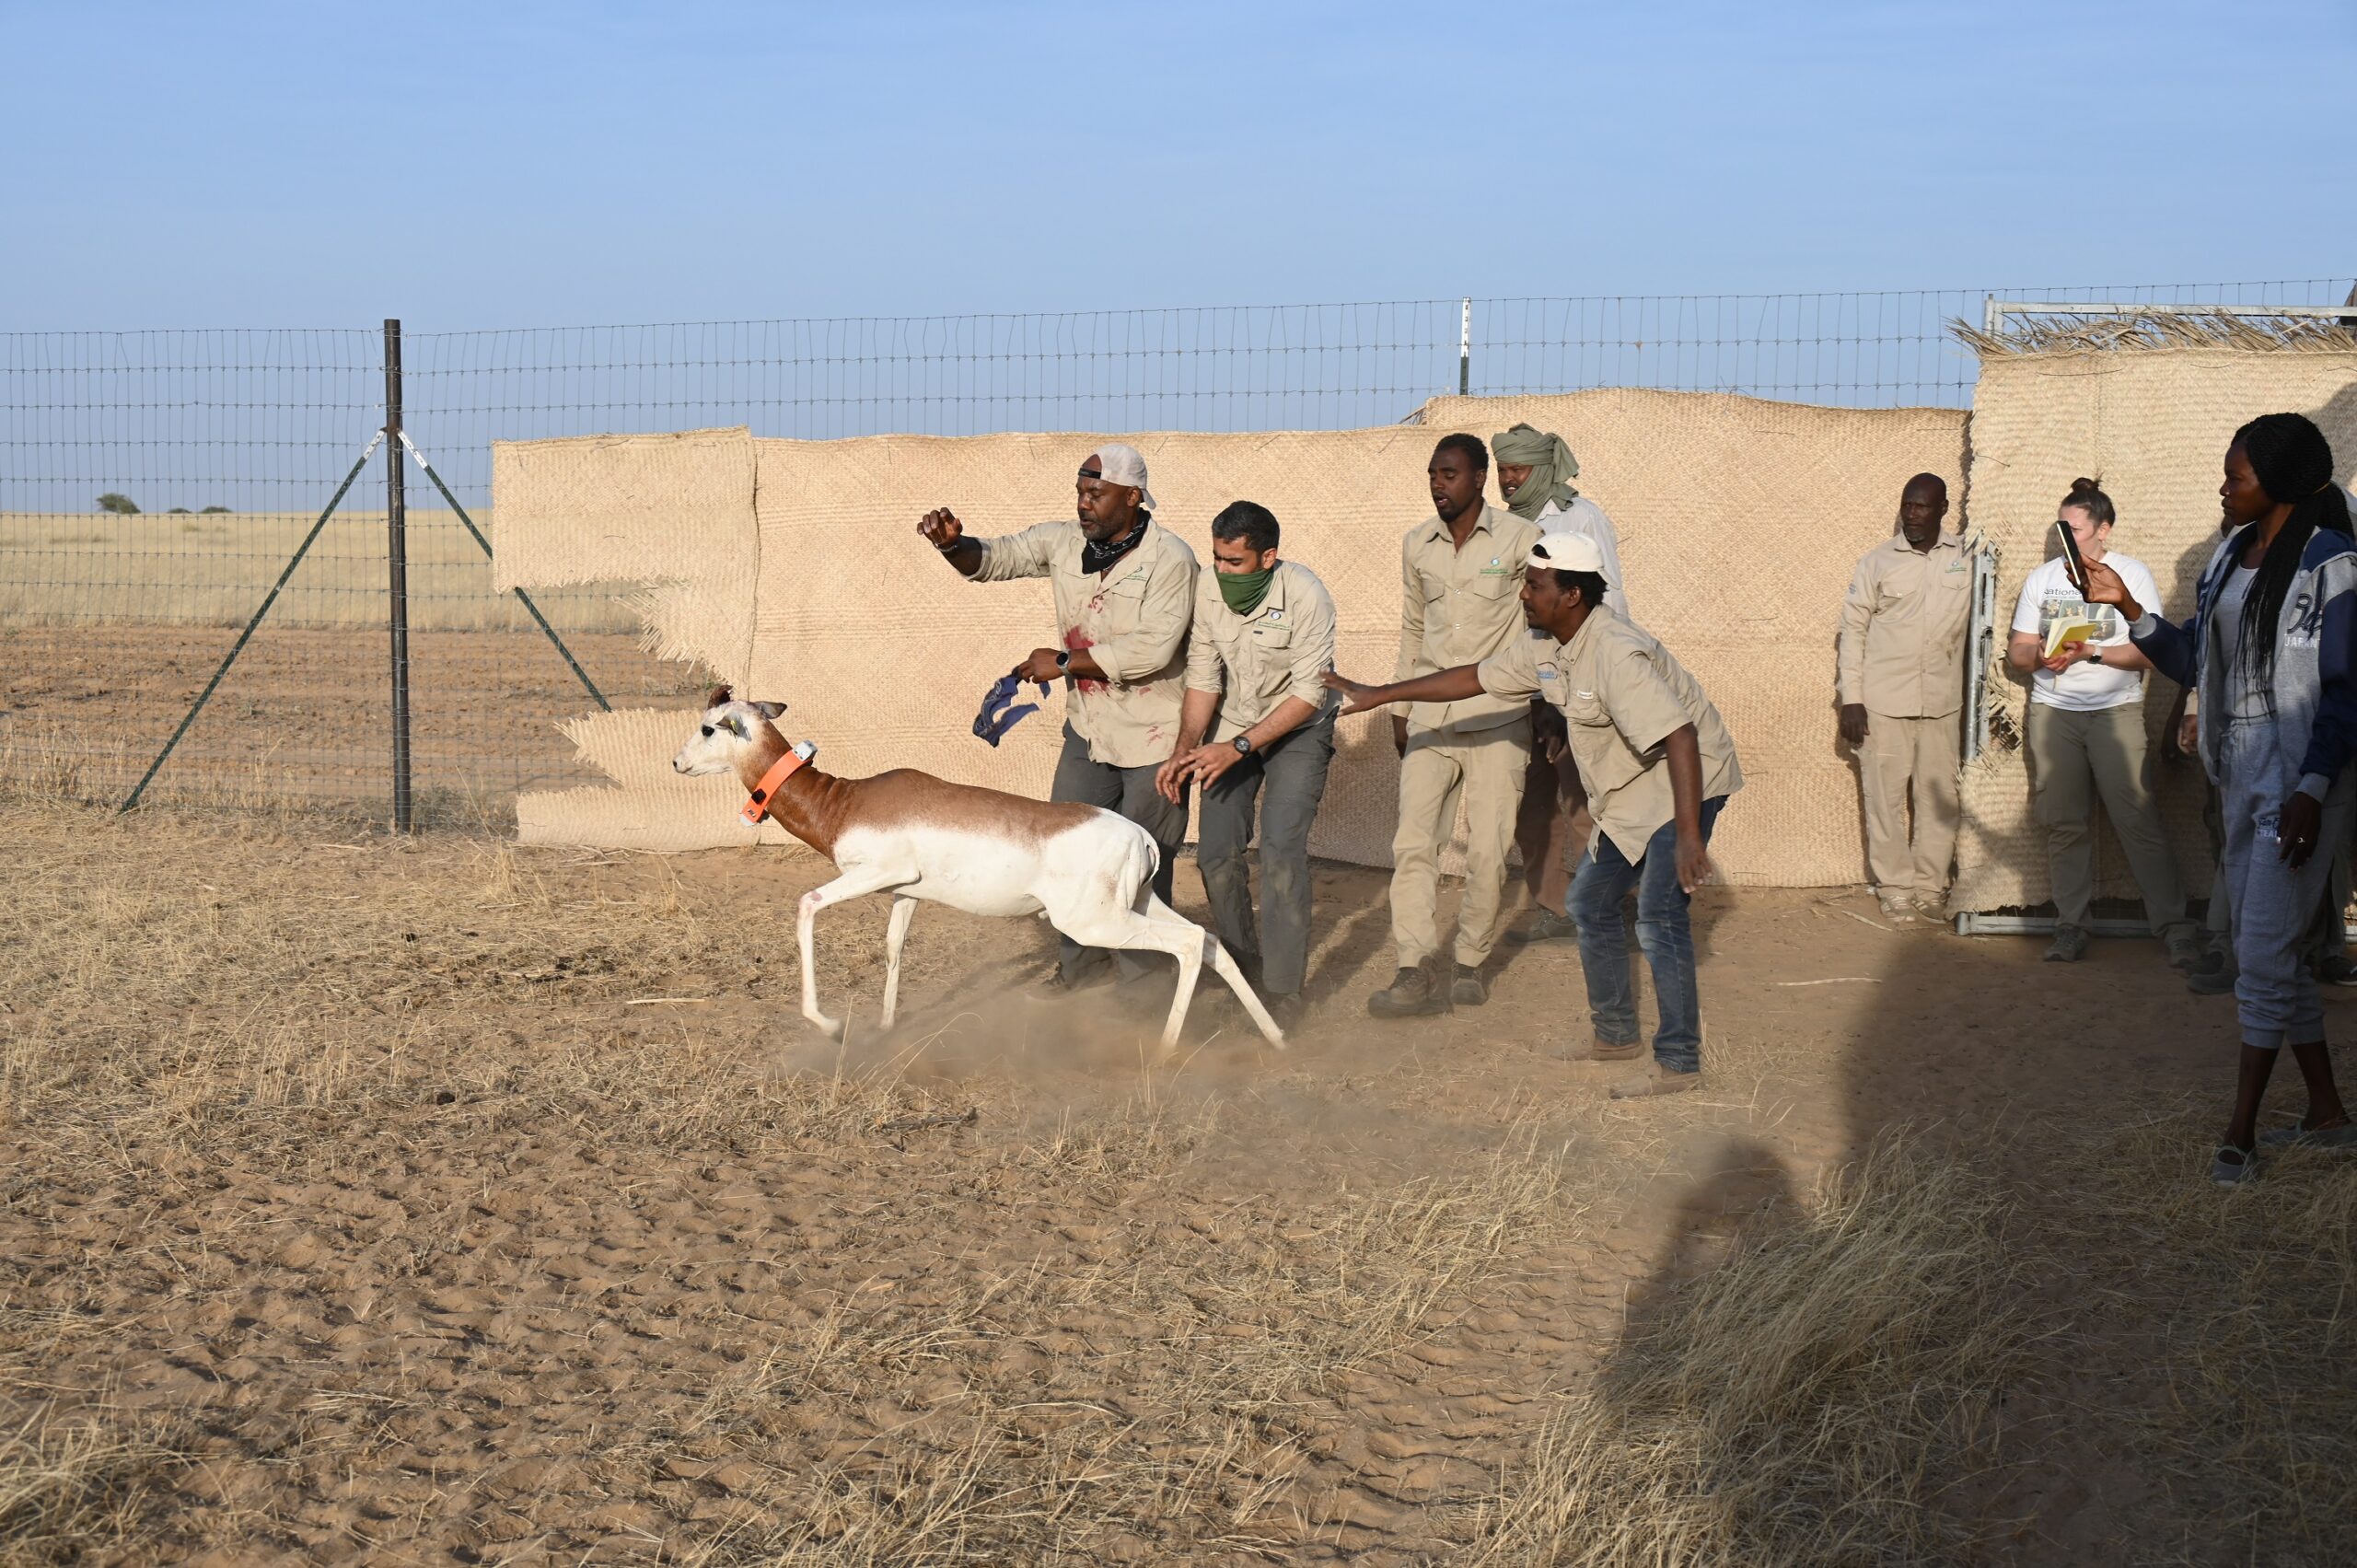 Image for The Environment Agency – Abu Dhabi Starts The First Reintroduction Phase Of Dama Gazelles In Chad